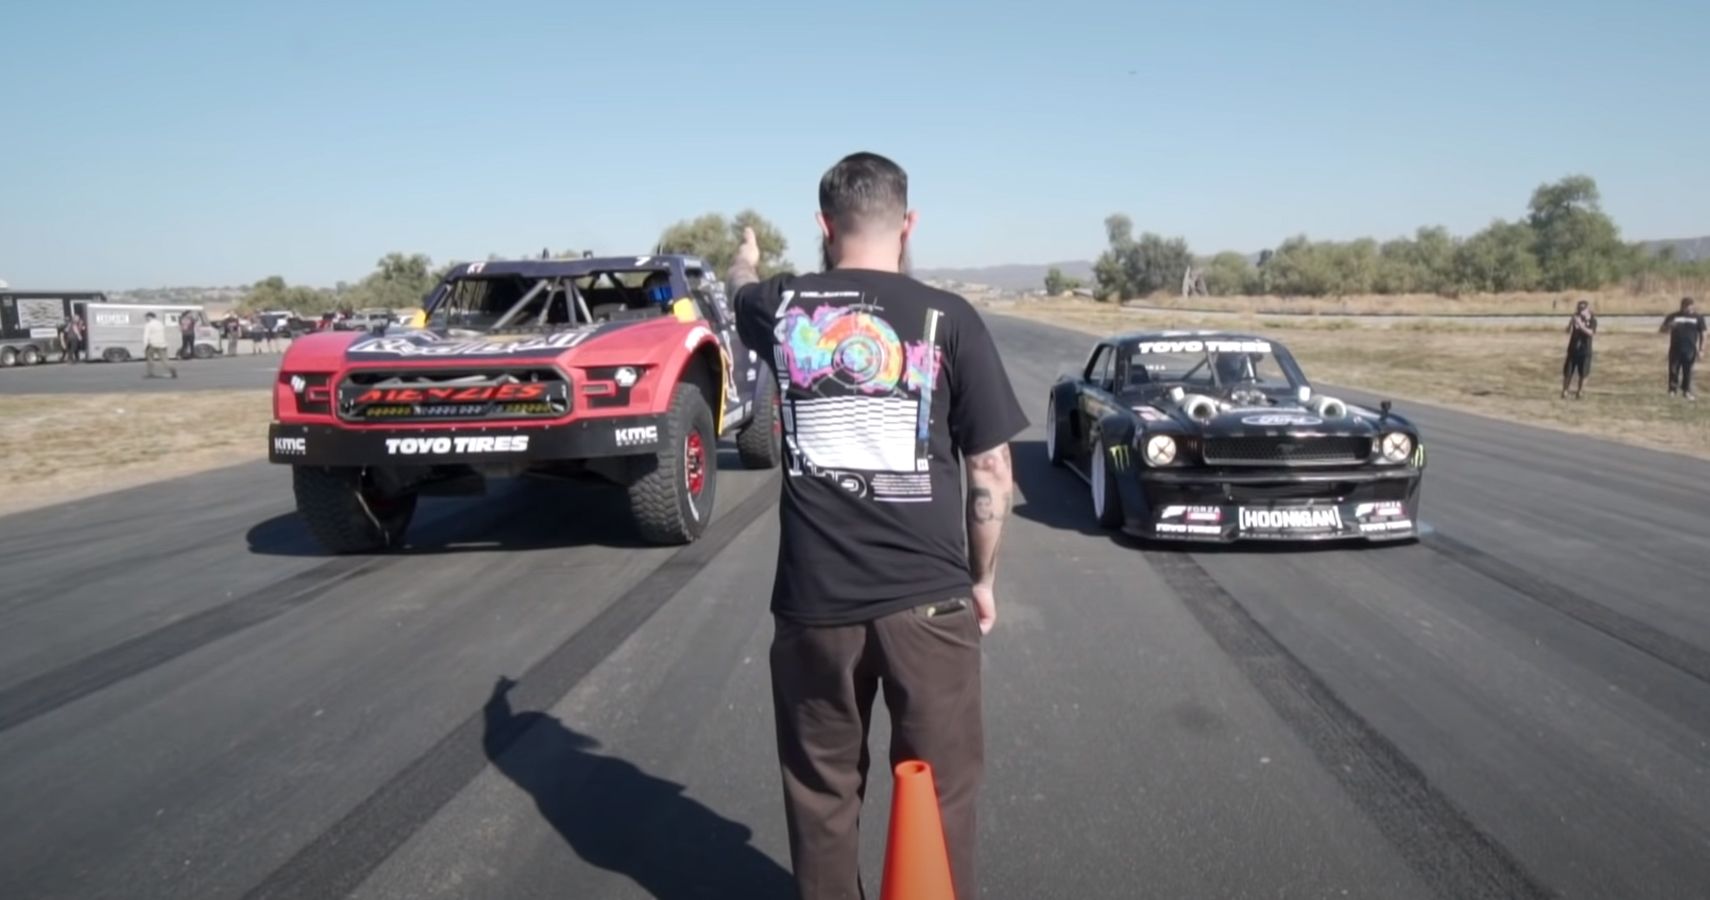 Menzies Trophy Truck lines up against the Mustang Hoonicorn in a drag race